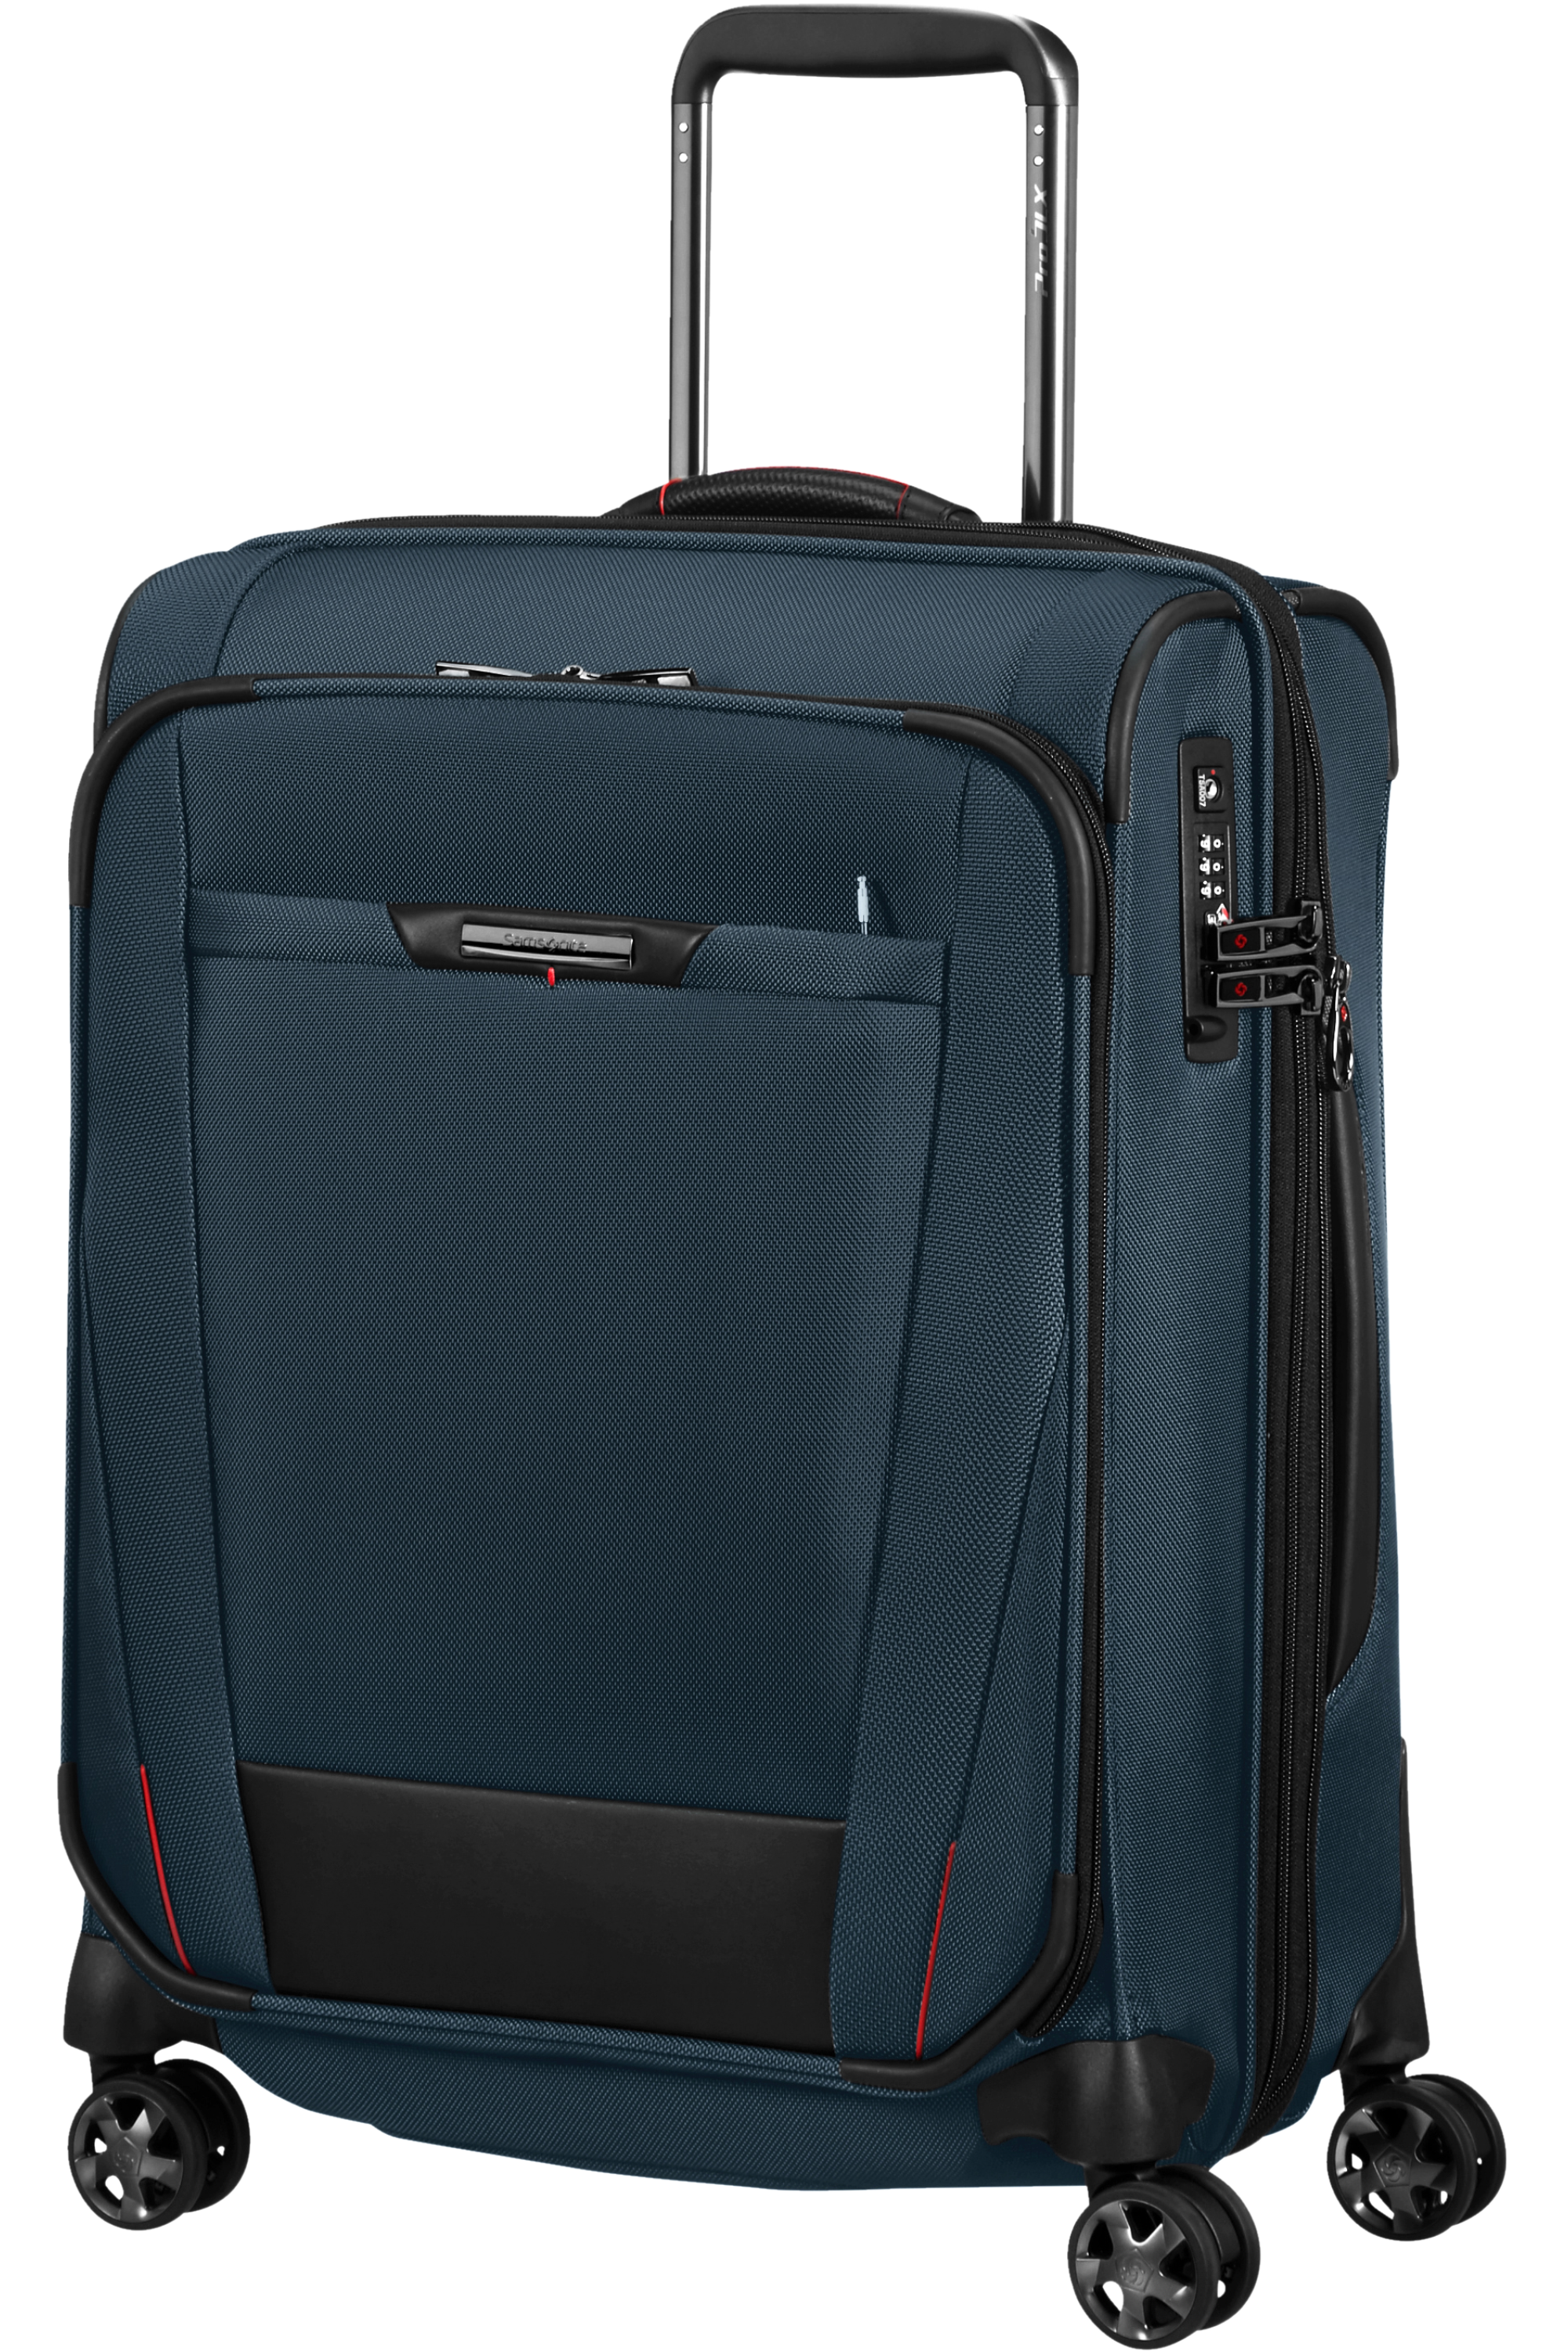 Oxford Blue Small Expandable Spinner Bagage Cabine 55 Centimeters 51.5 Bleu SAMSONITE Pro-DLX 